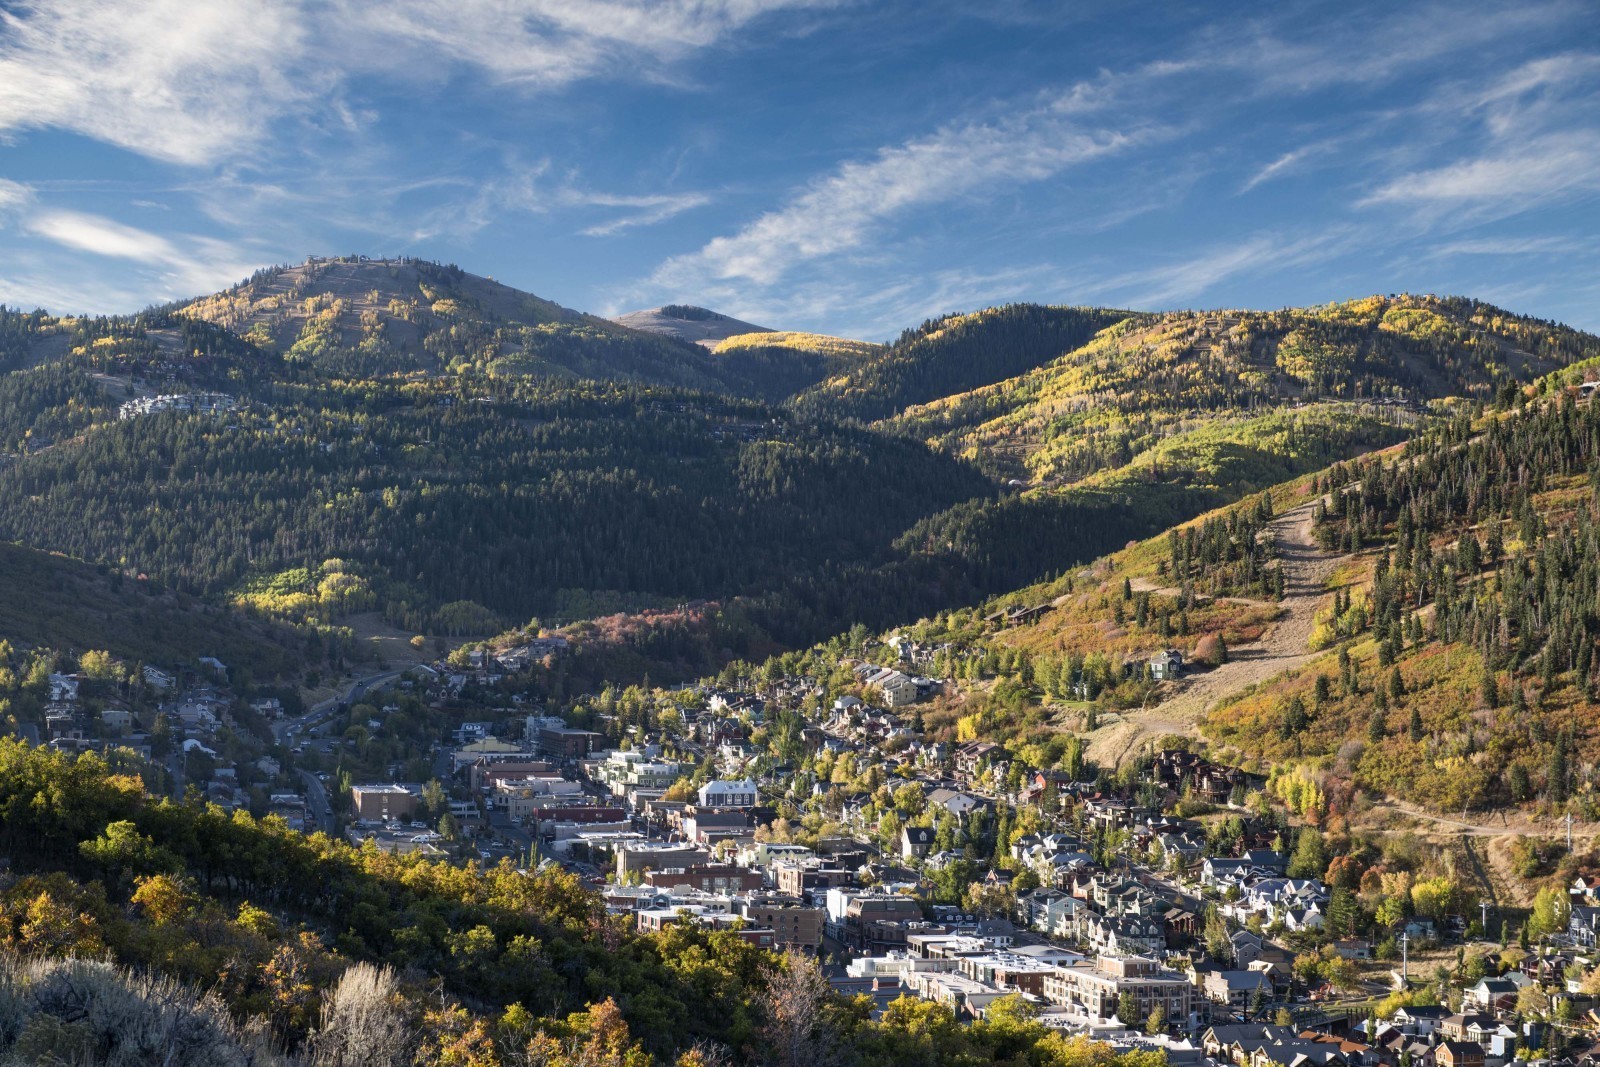 Distance view of Old Town Park City in the falljpg